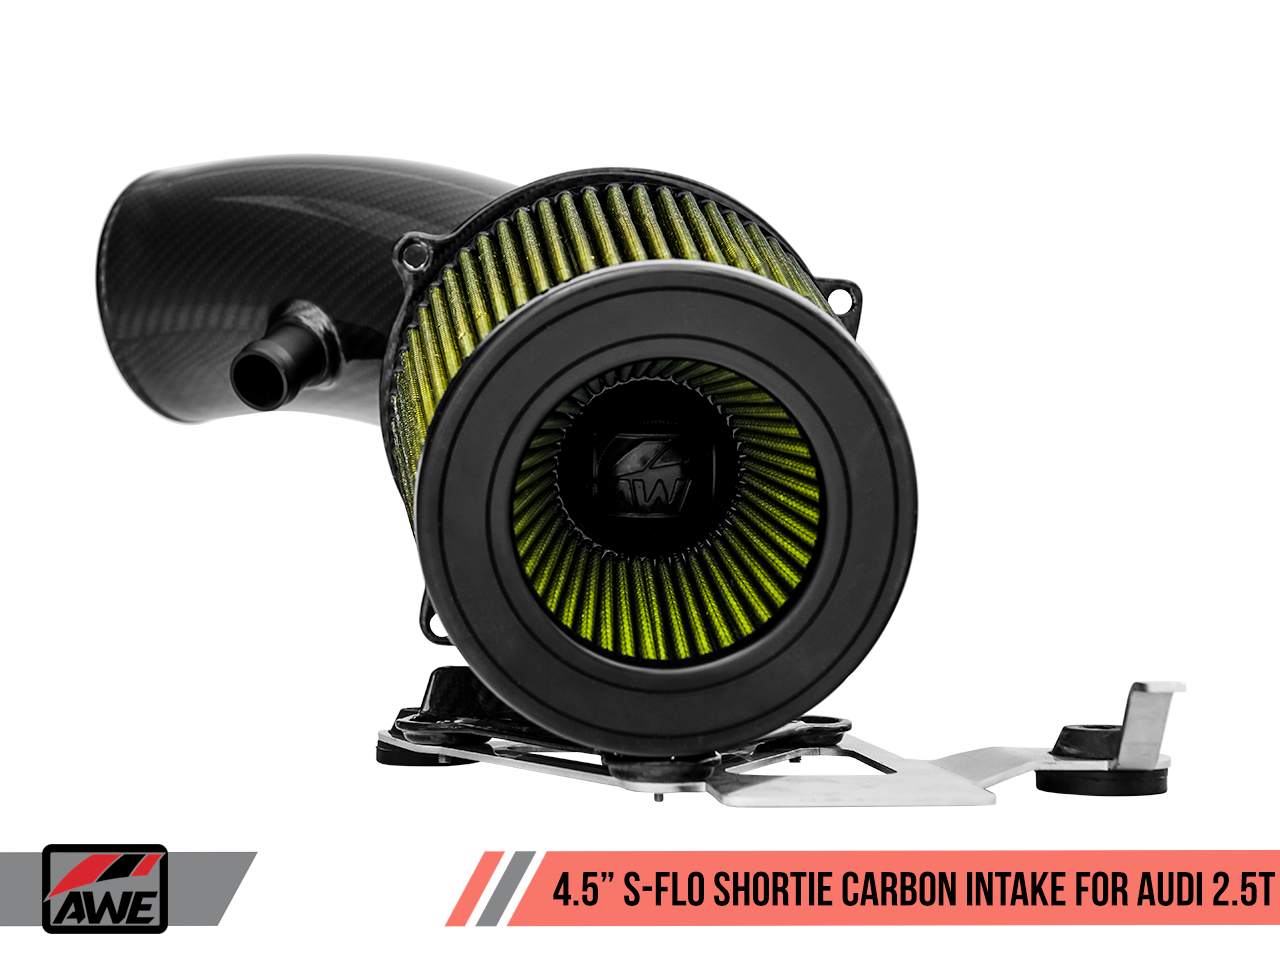 AWE 4.5" S-FLO Shortie Carbon Intake for Audi RS 3 / TT RS